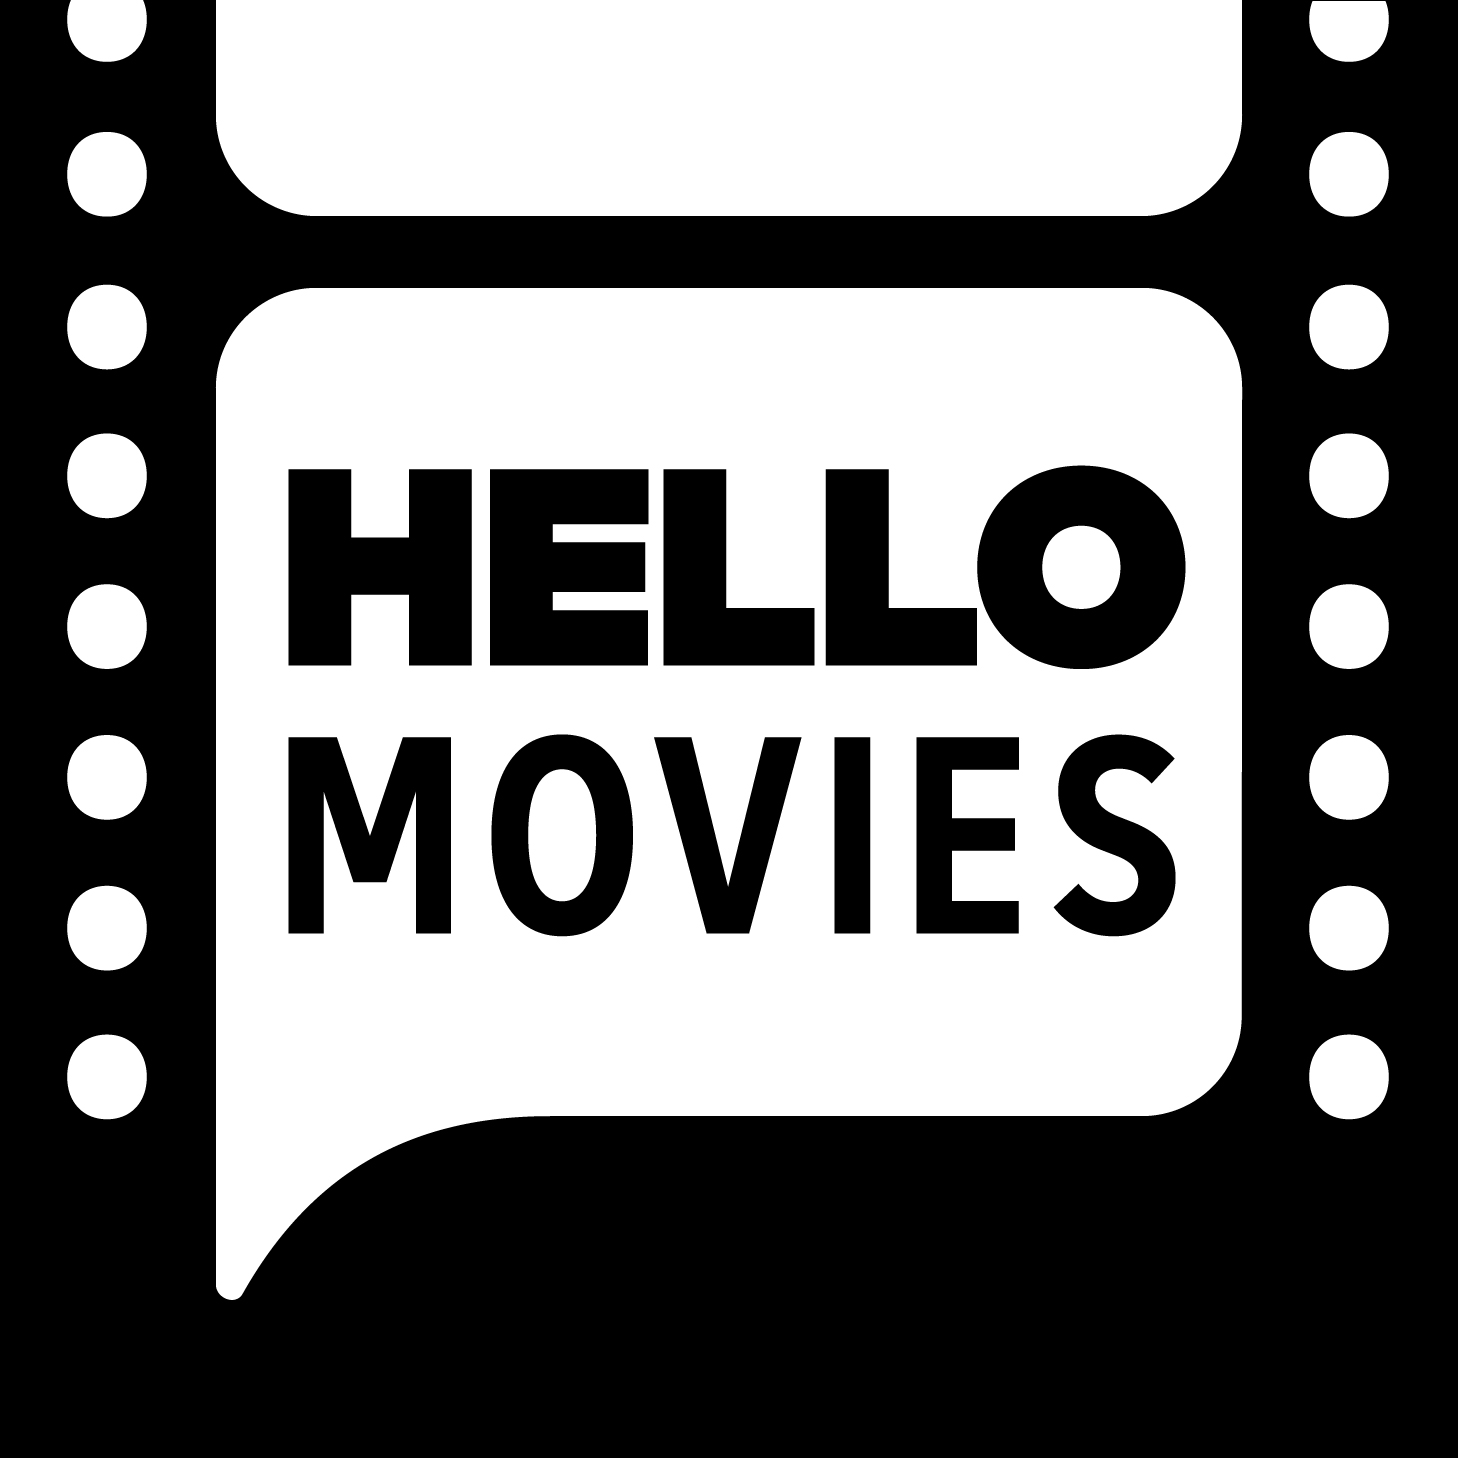 2020 Vision: Fresh movies and a new host!